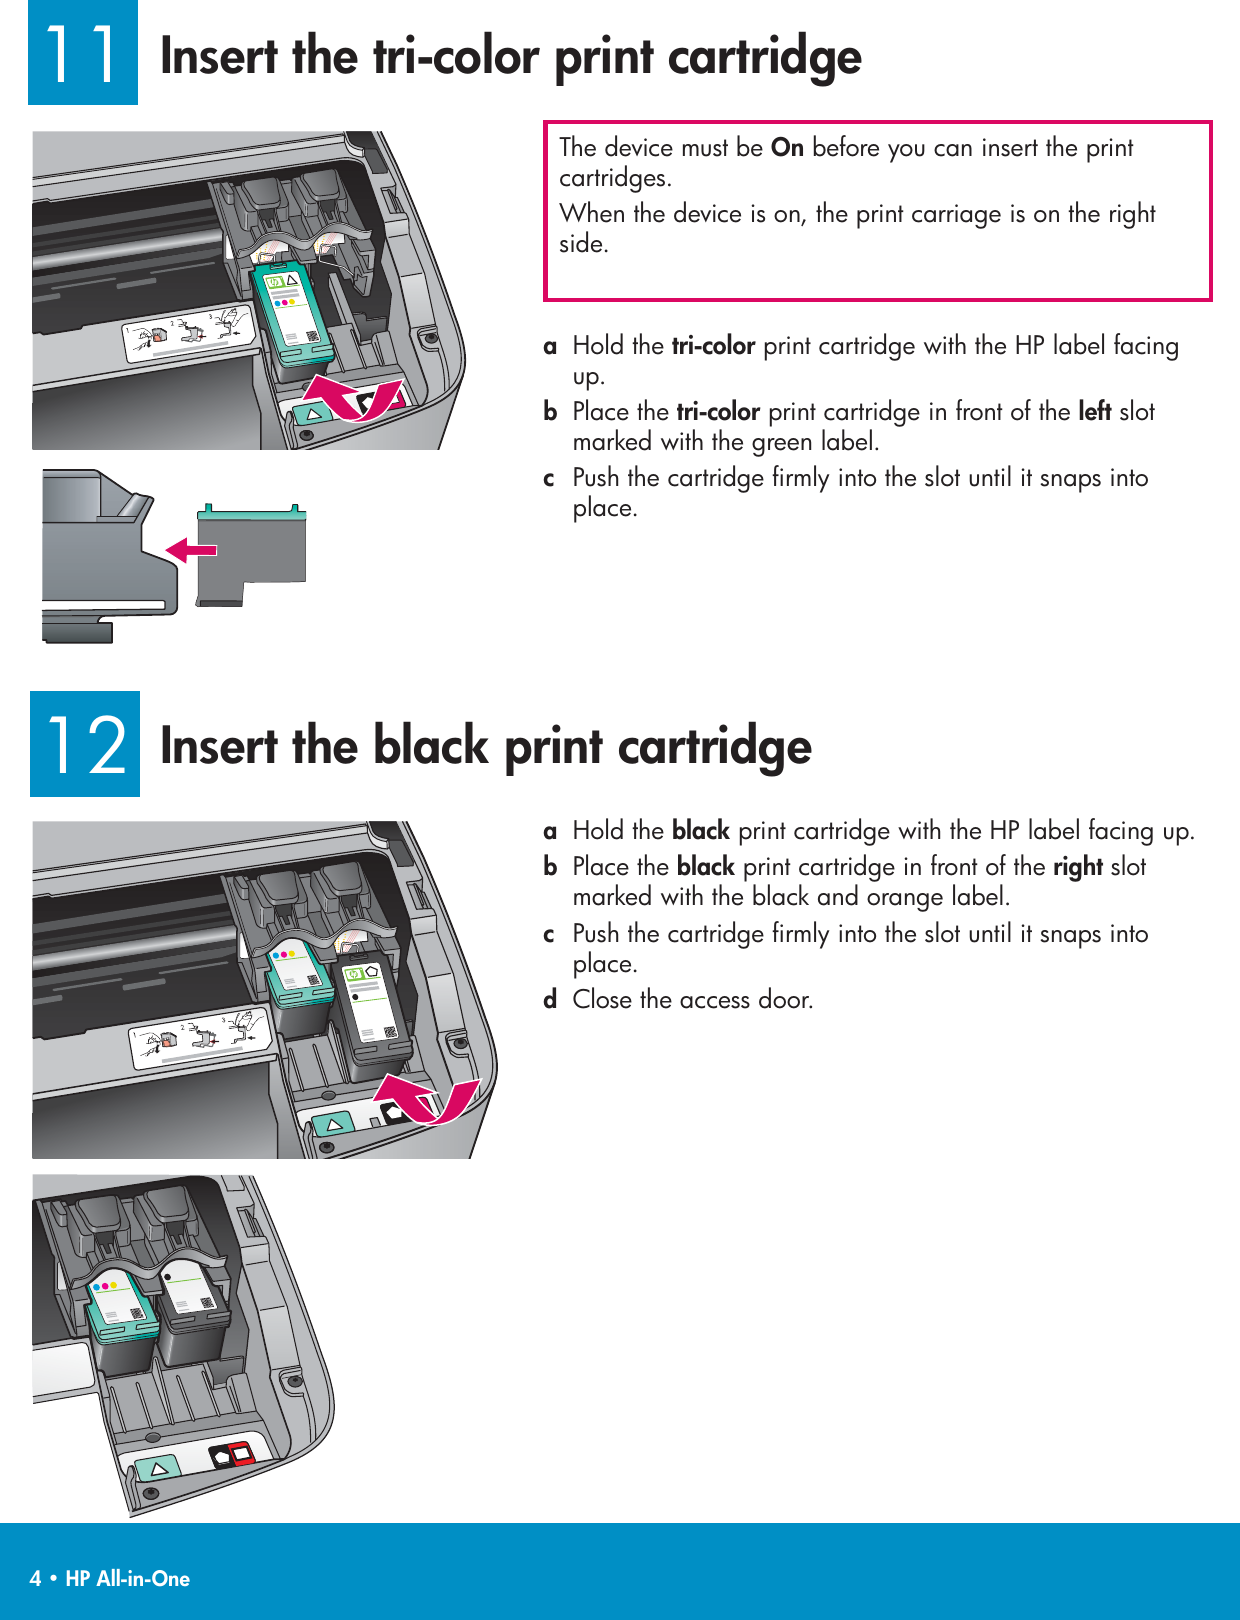 Page 4 of 12 - Hp Hp-Photosmart-2575-All-In-One-Printer-Setup-Guide- USSherpaHi  Hp-photosmart-2575-all-in-one-printer-setup-guide